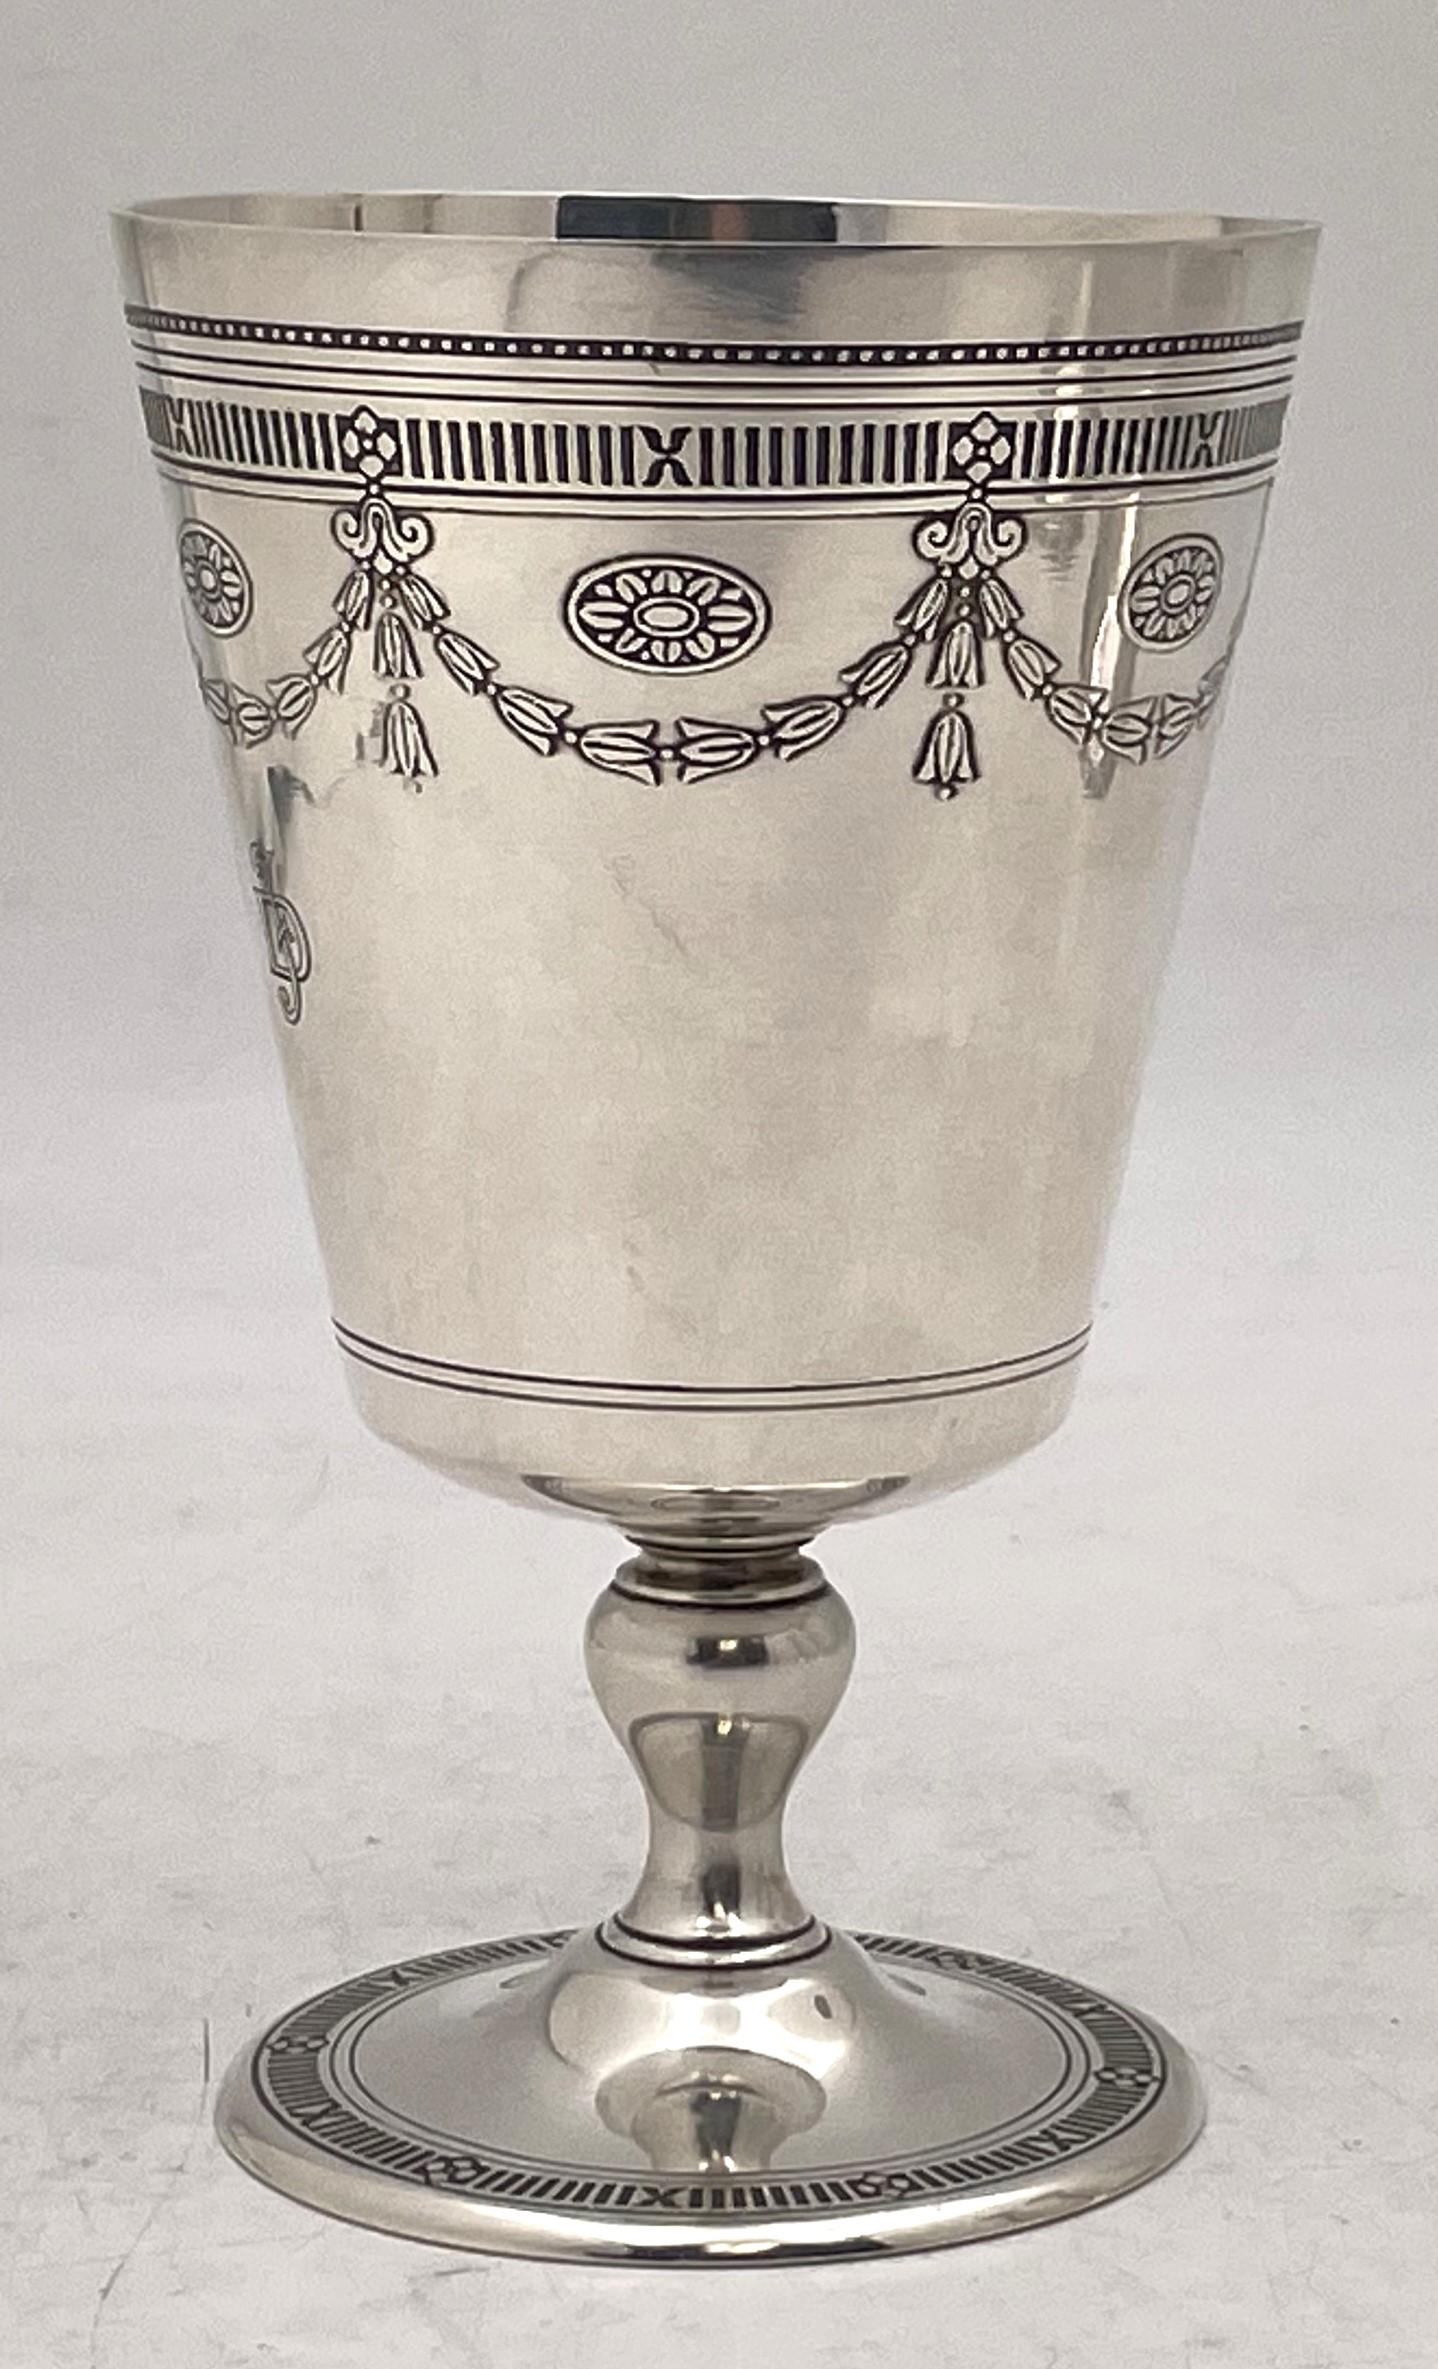 Tiffany & Co. sterling silver Kiddush cup or goblet in pattern number 20169A from 1923 and in Art Deco Style, with an elegant, geometric design, finely engraved with stylized motifs. It measures 5 1/2'' in height by 3 1/3'' in diameter at the top,